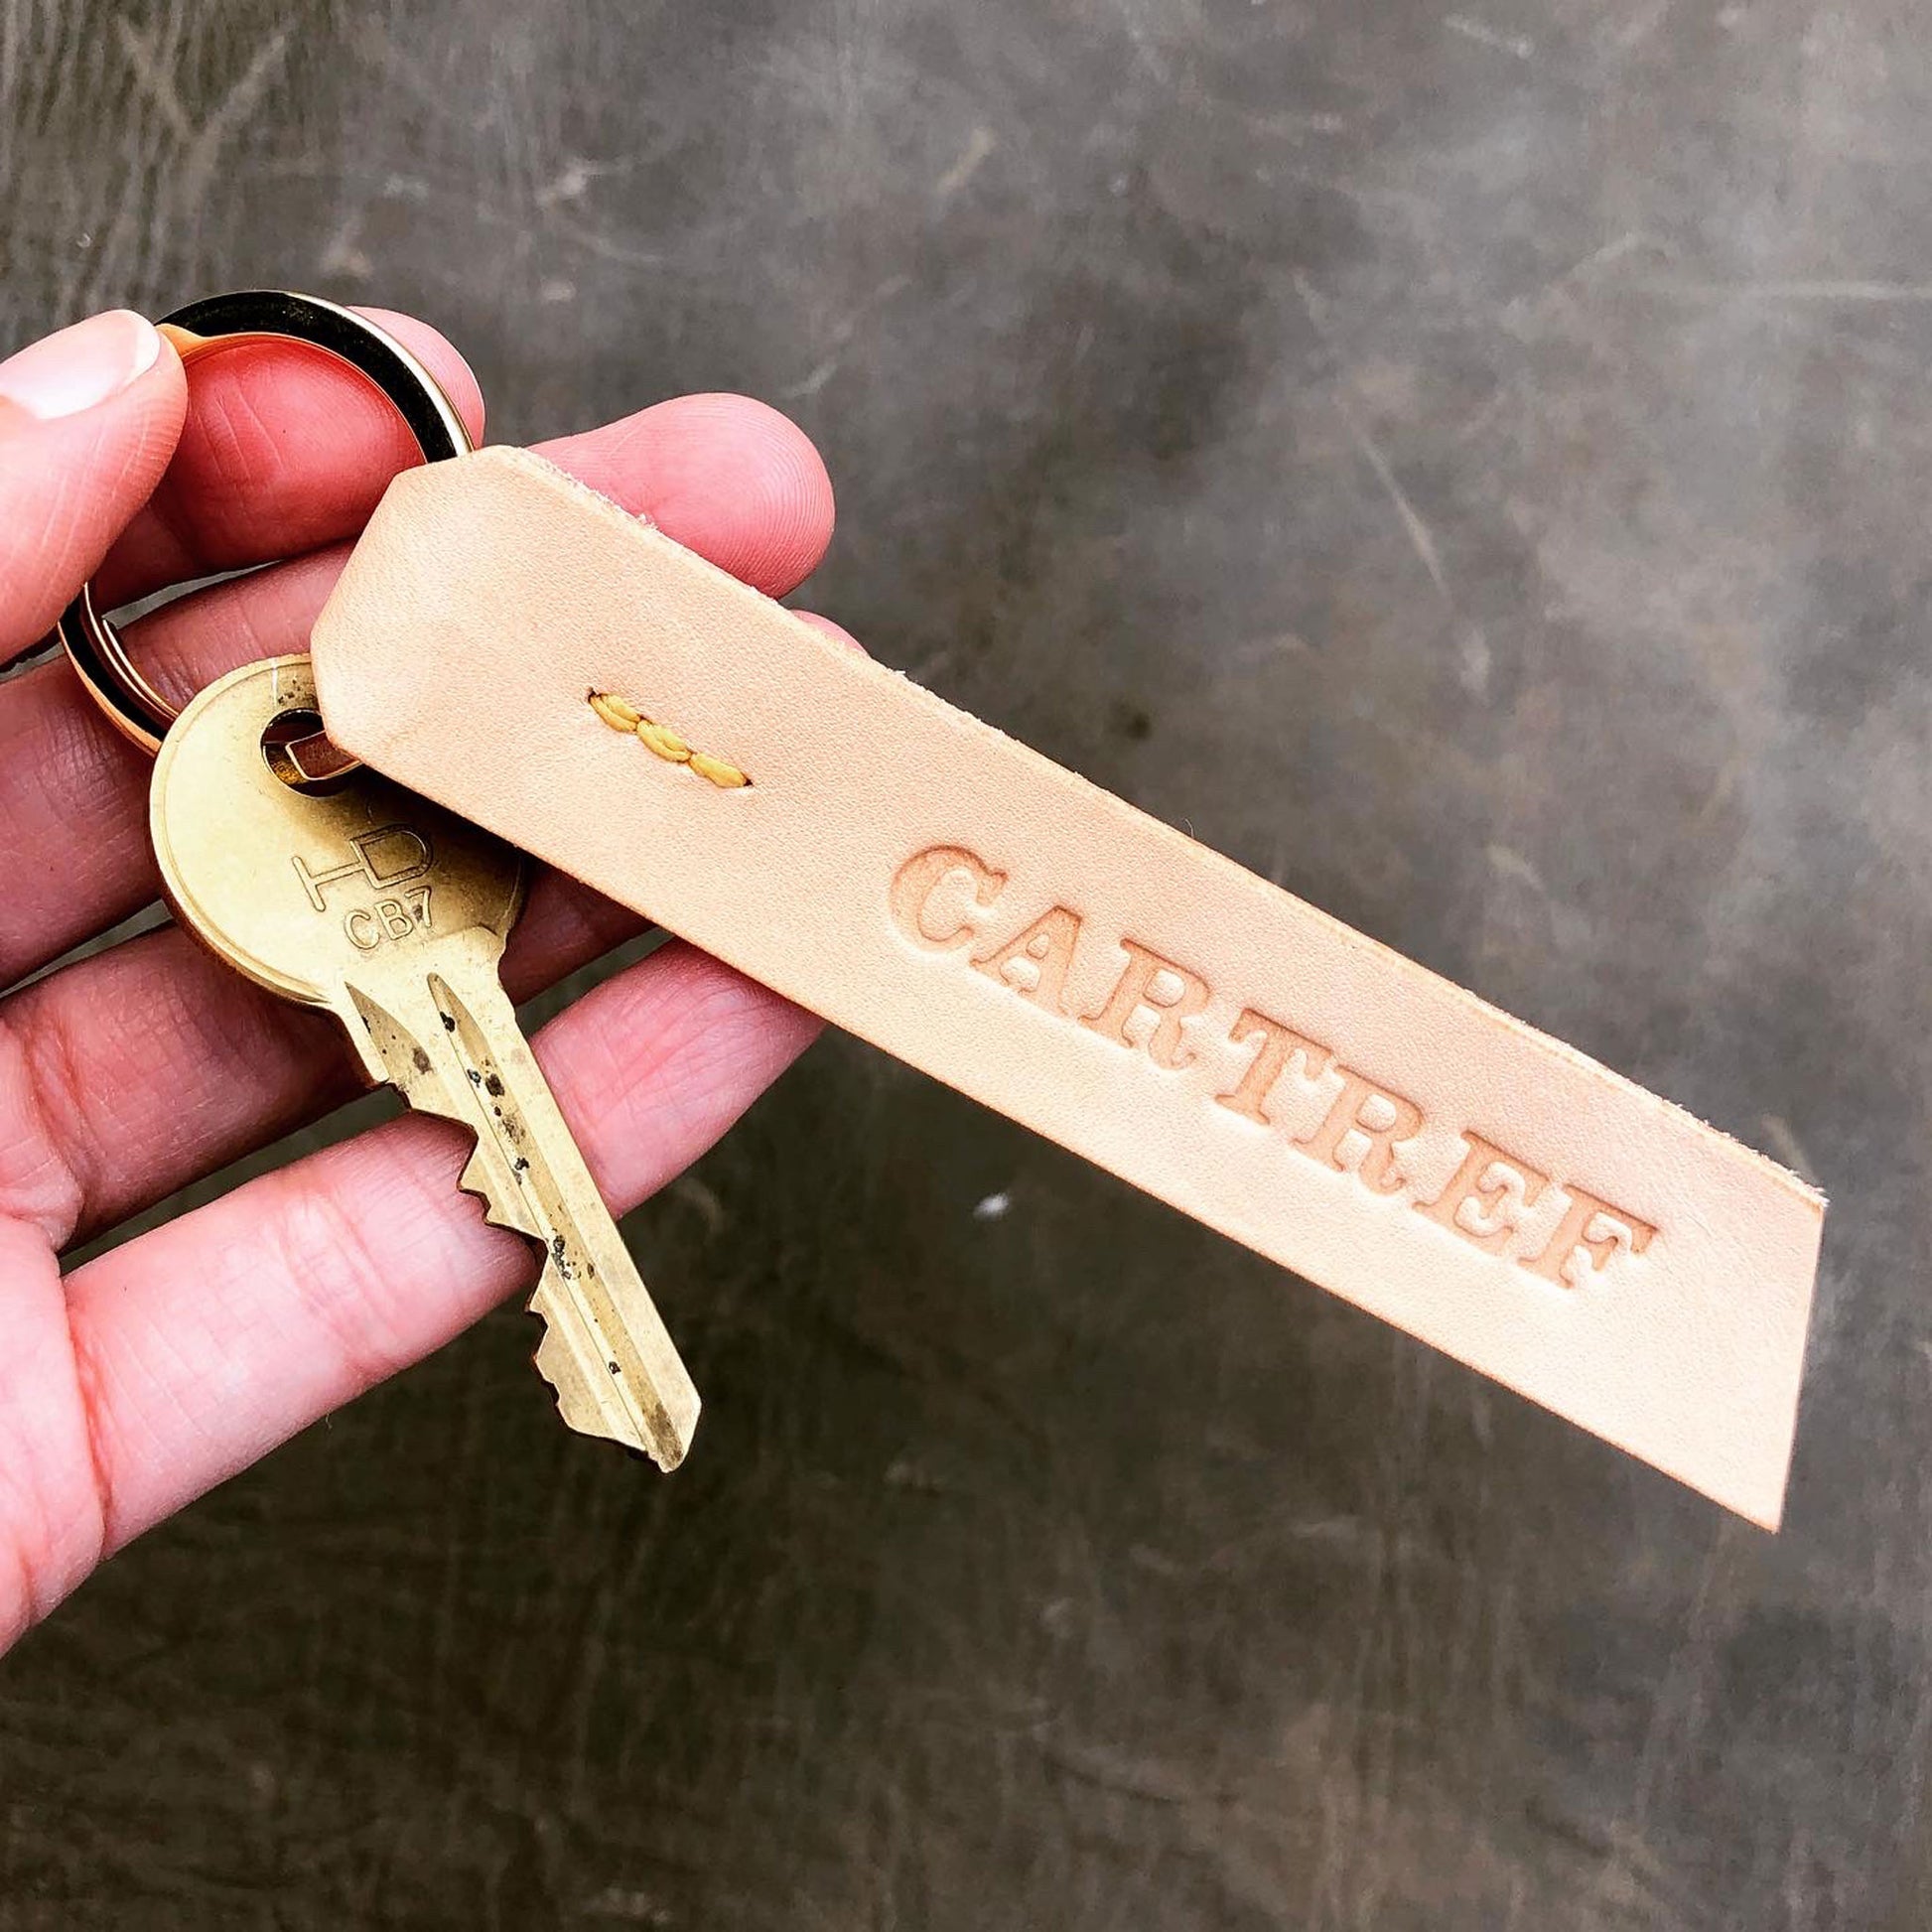 A keyring made from undyed vegetable tanned leather is held in a hand in front of a grey leather background. The keyring has yellow stitching and the word "CARTREF" stamped into it